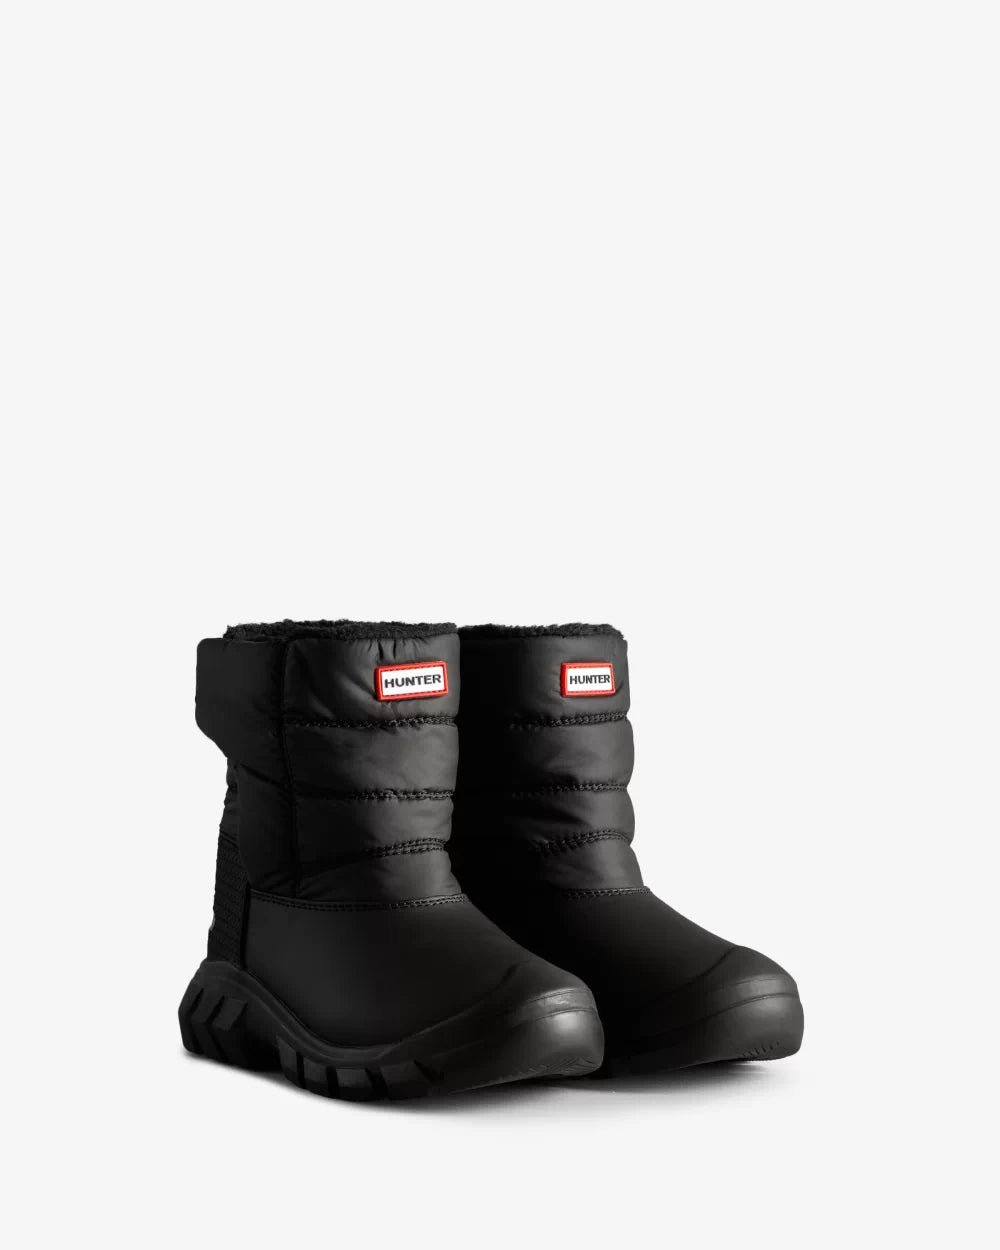 Big Kids Snow Boot - The Shoe CollectiveHunter Boots